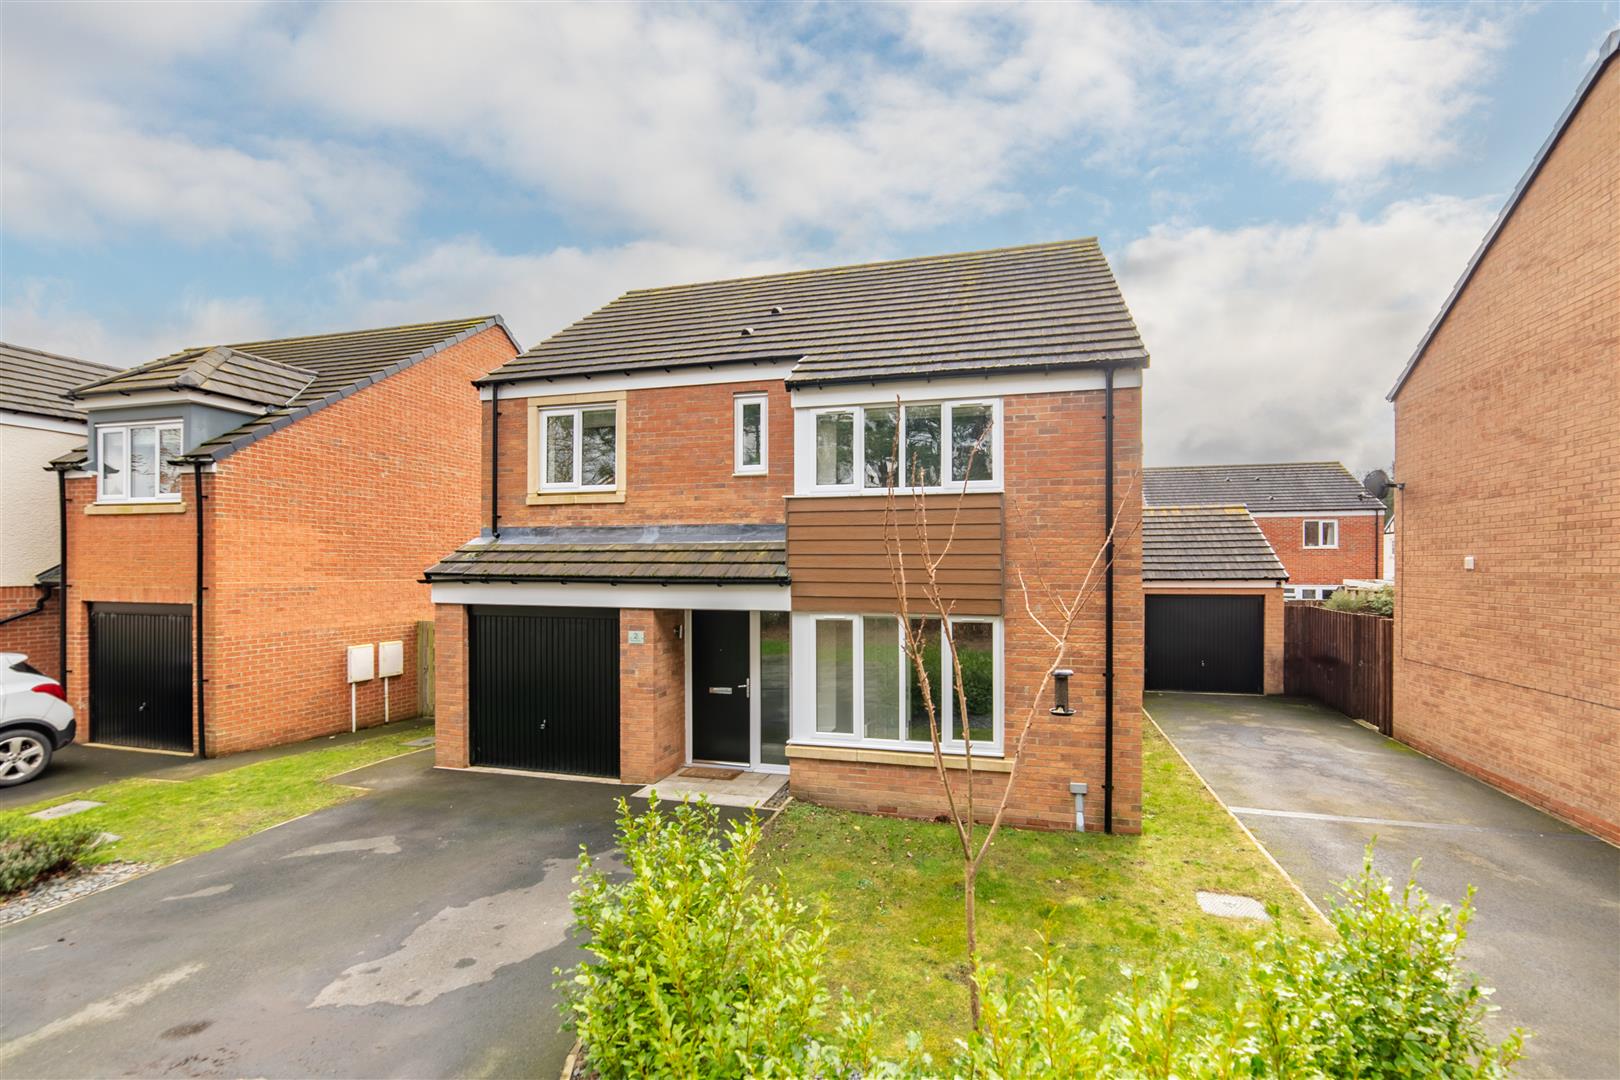 4 bed detached house for sale in Burnholme Way, Morpeth 0